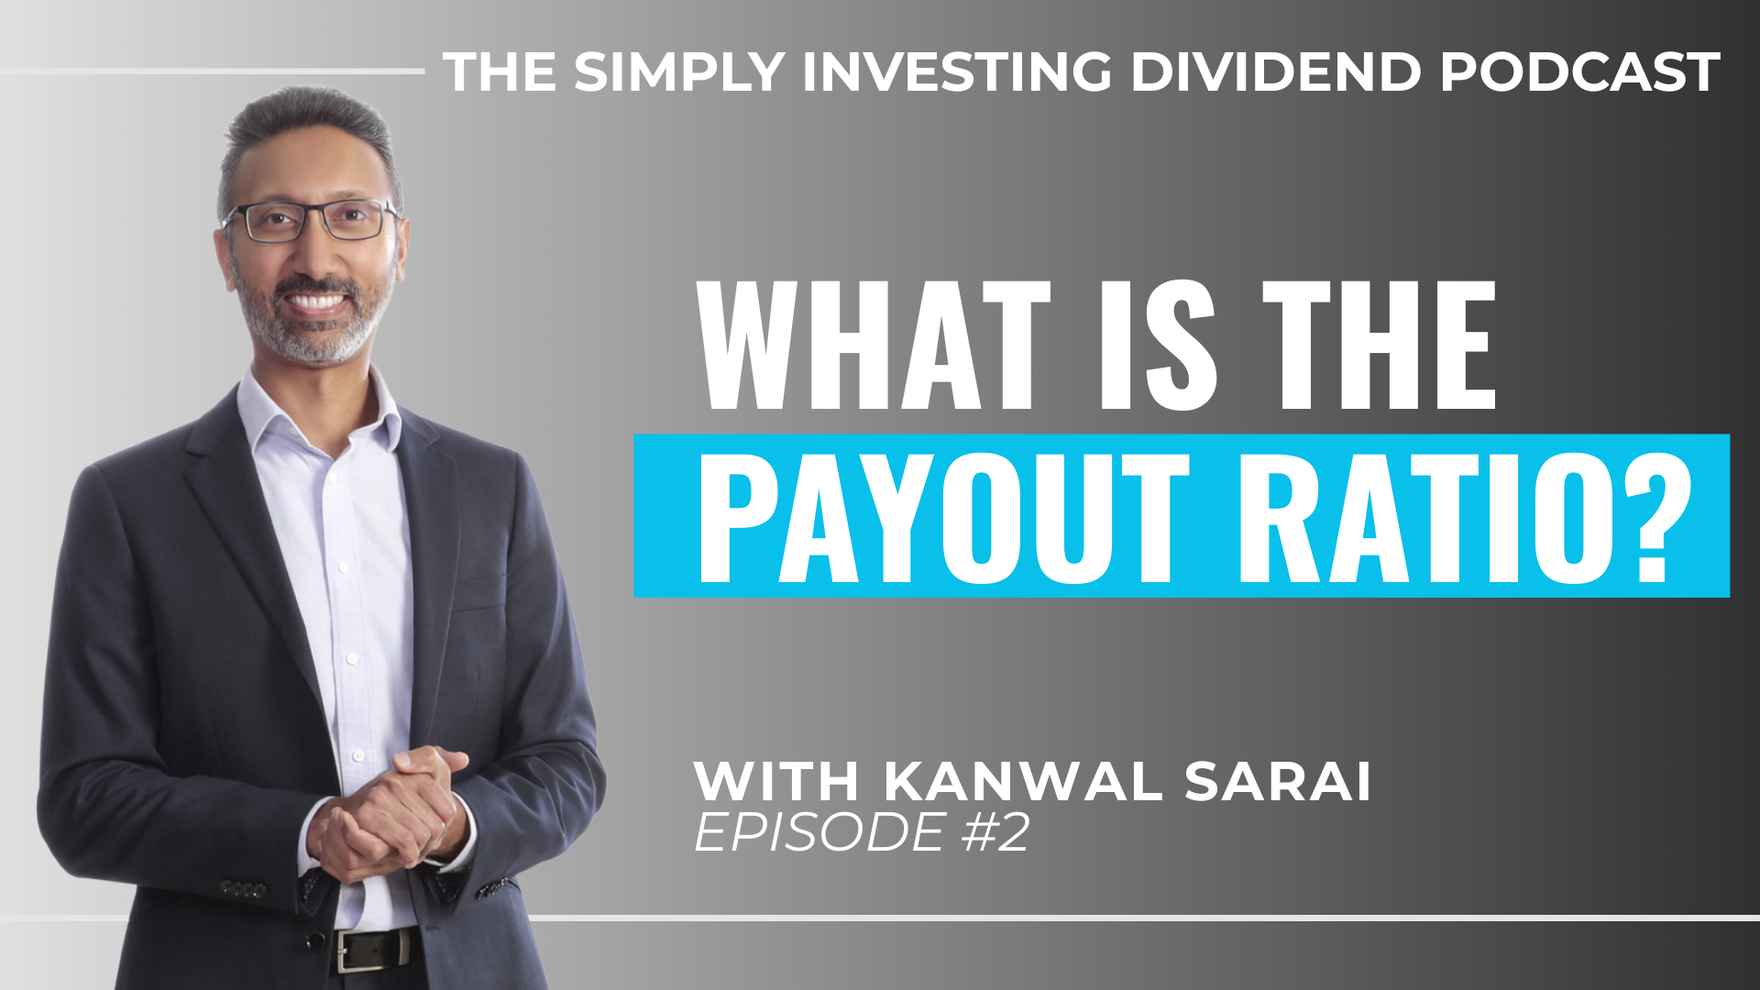 Simply Investing Dividend Podcast Episode 2 - What is the Payout Ratio